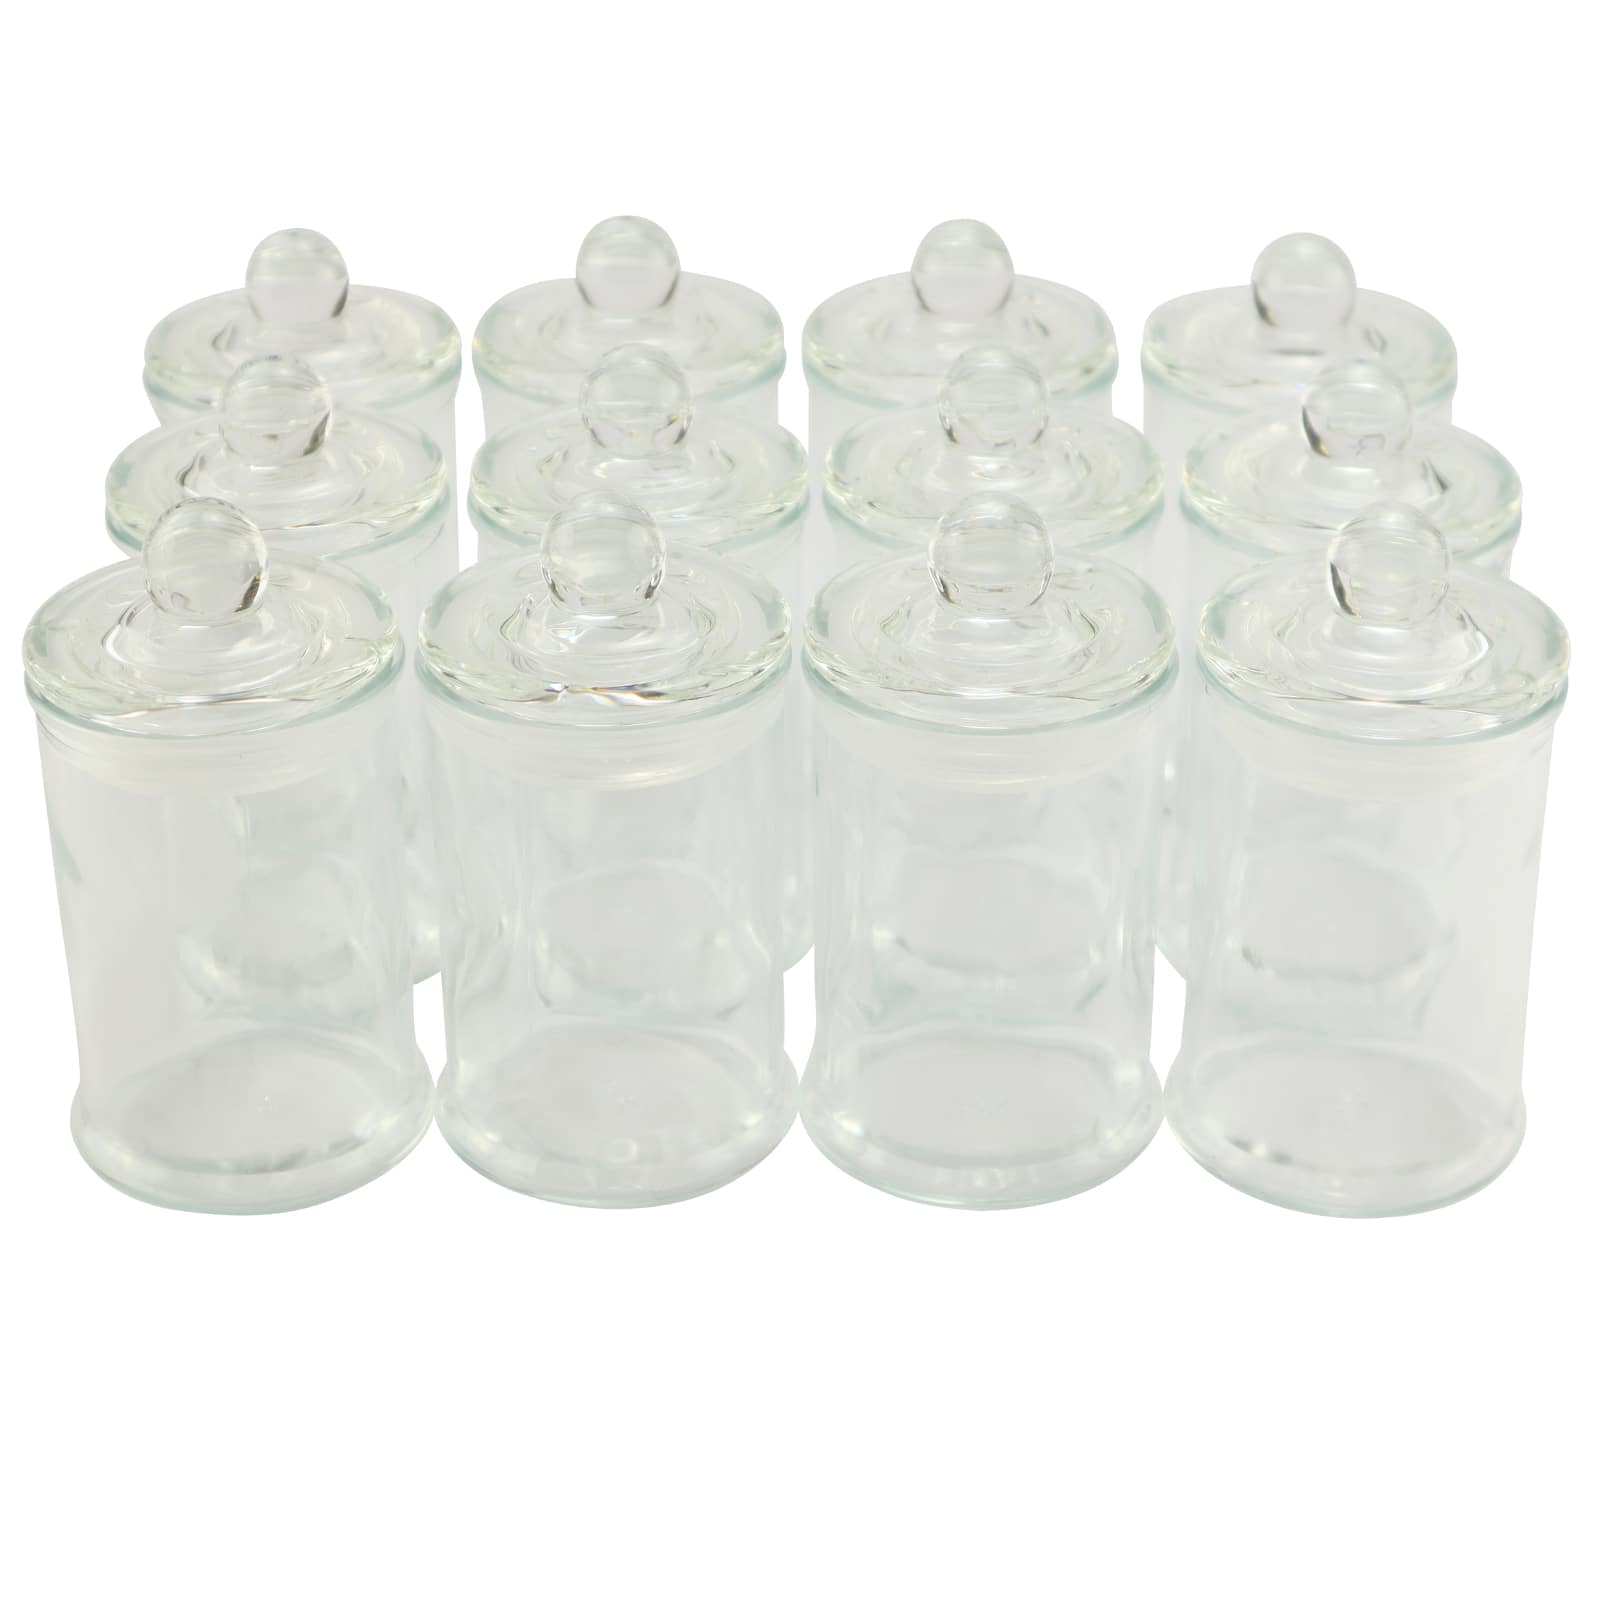 6 Packs: 12 ct. (72 total) Mini Glass Jars with Lids by Celebrate It&#x2122;